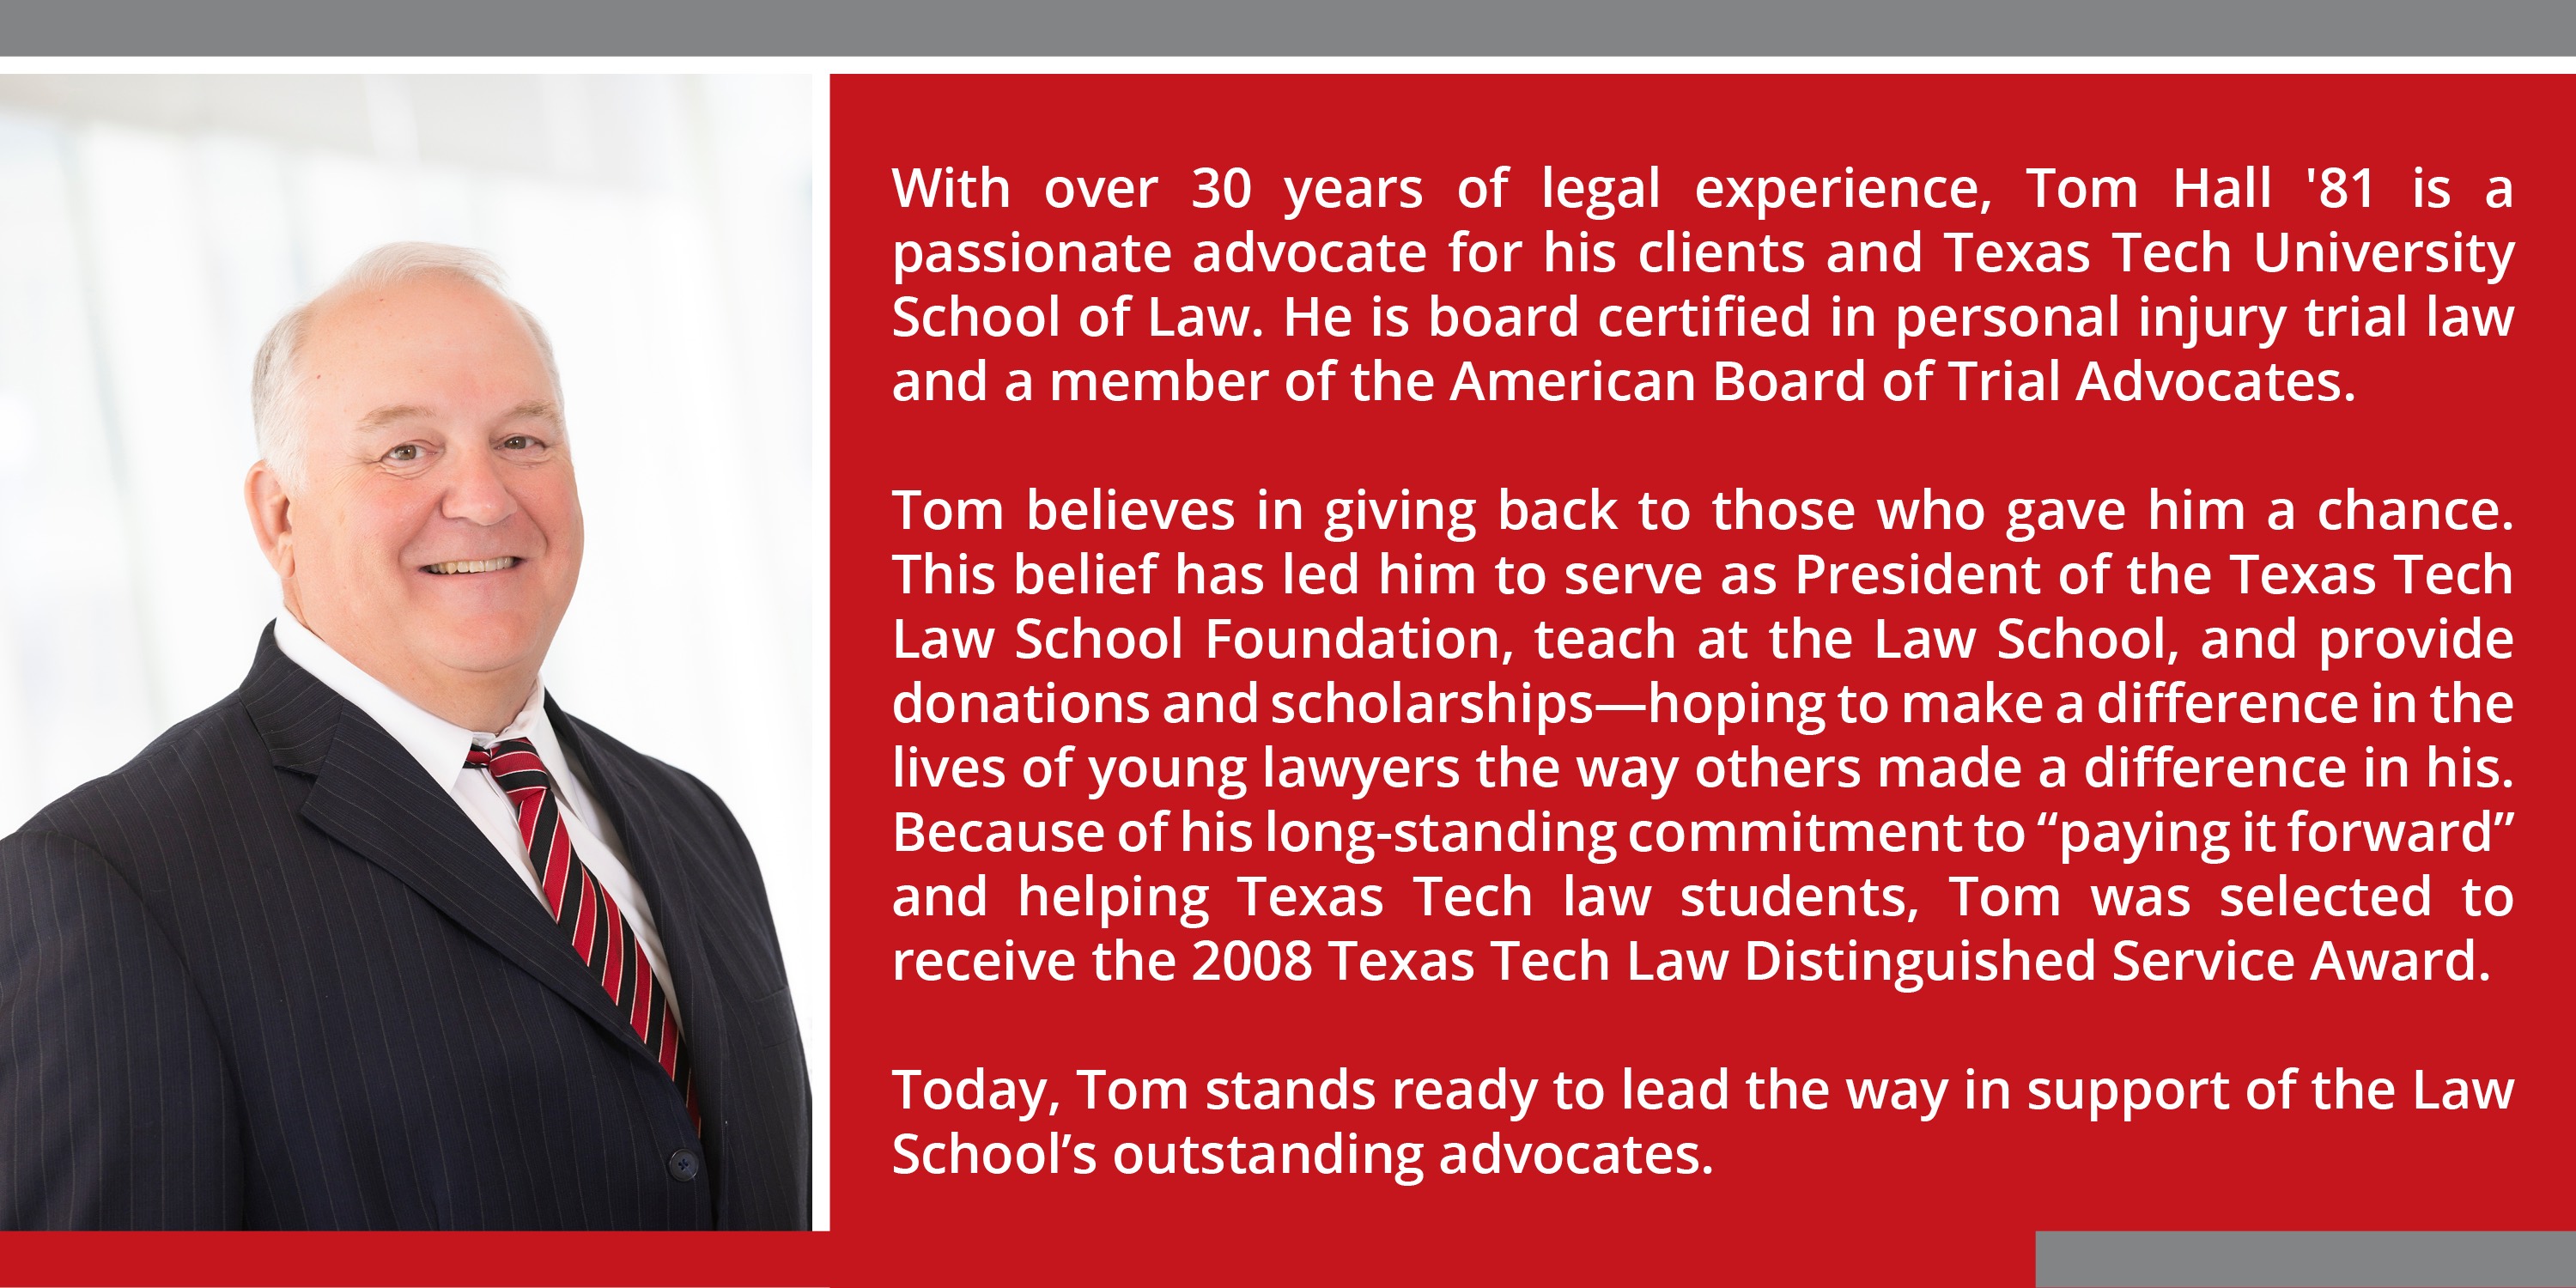 With over 30 years of legal experience, Tom Hall ’81 is a passionate advocate for his clients and Texas Tech University School of Law. He is board certified in personal injury trial law and a member of the American Board of Trial Advocates.   Tom believes in giving back to those who gave him a chance. This belief has led him to serve as President of the Texas Tech Law School Foundation, teach at the Law School, and provide donations and scholarships—hoping to make a difference in the lives of young lawyers the way others made a difference in his. Because of his long-standing commitment to "paying it forward" and helping Texas Tech law students, Tom was selected to receive the 2008 Texas Tech Law Distinguished Service Award.  Today, Tom stands ready to lead the way in support of the Law School’s outstanding advocates.